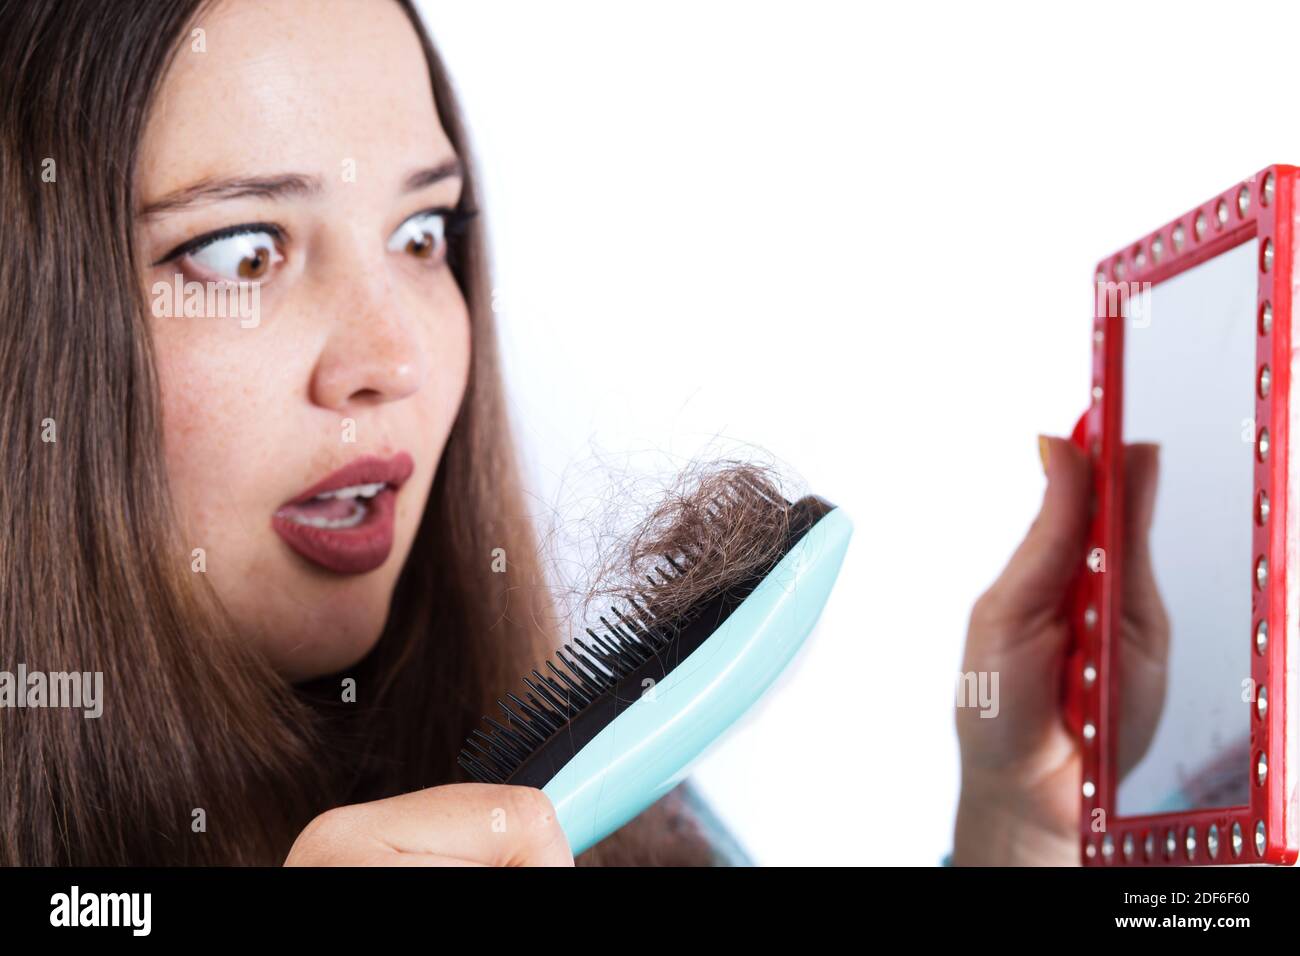 Young woman scared of loosing her hair, lost hair on a brush. Stock Photo